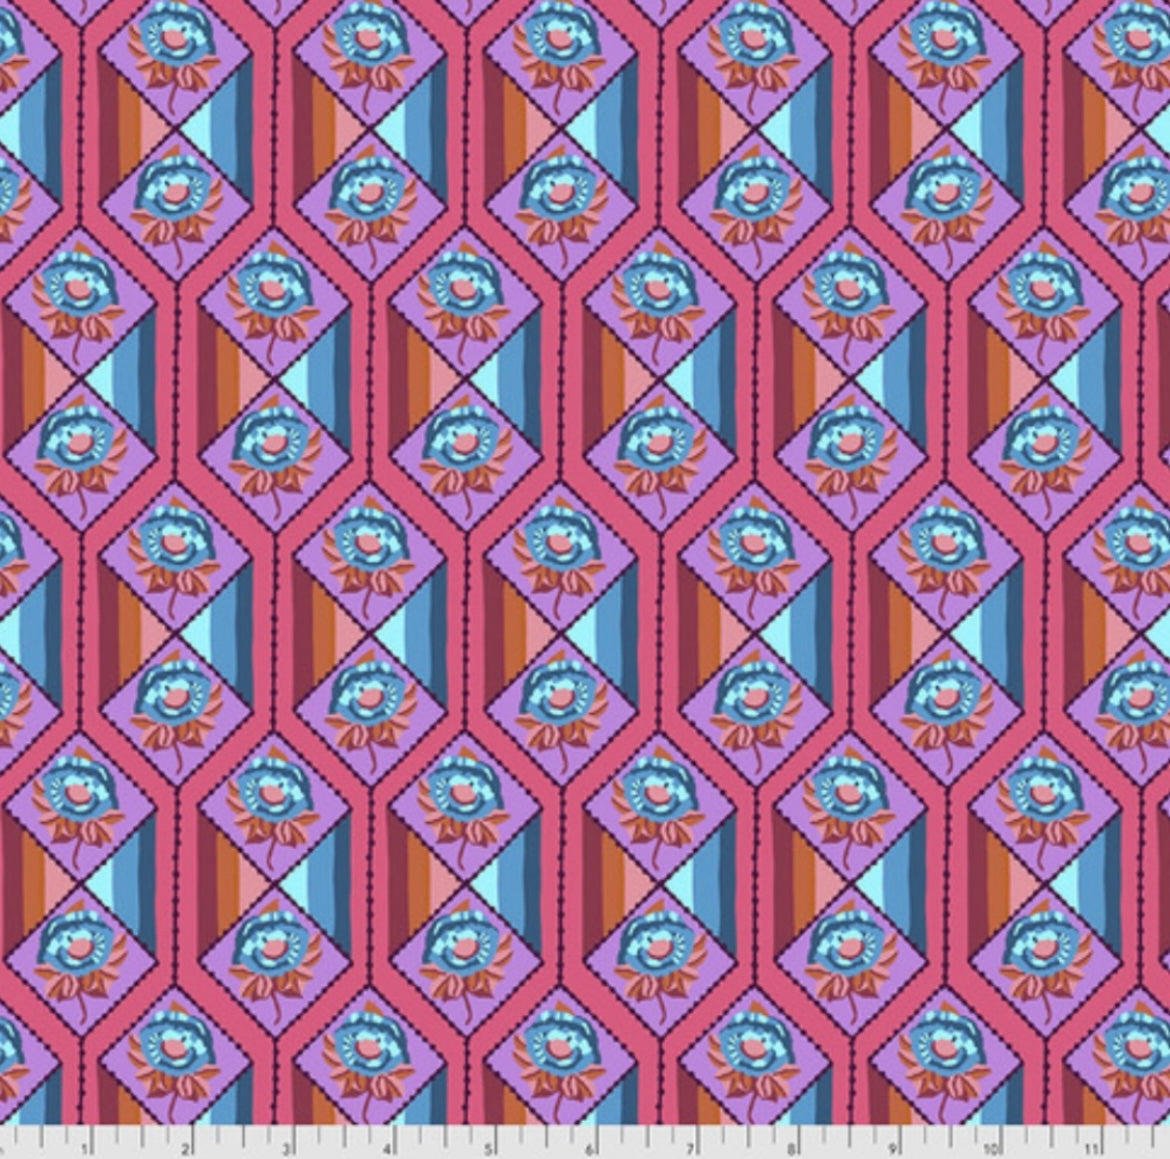 Facets - Coral - Bright Eyes Collection by Anna Maria Horner - FreeSpirit Fabrics